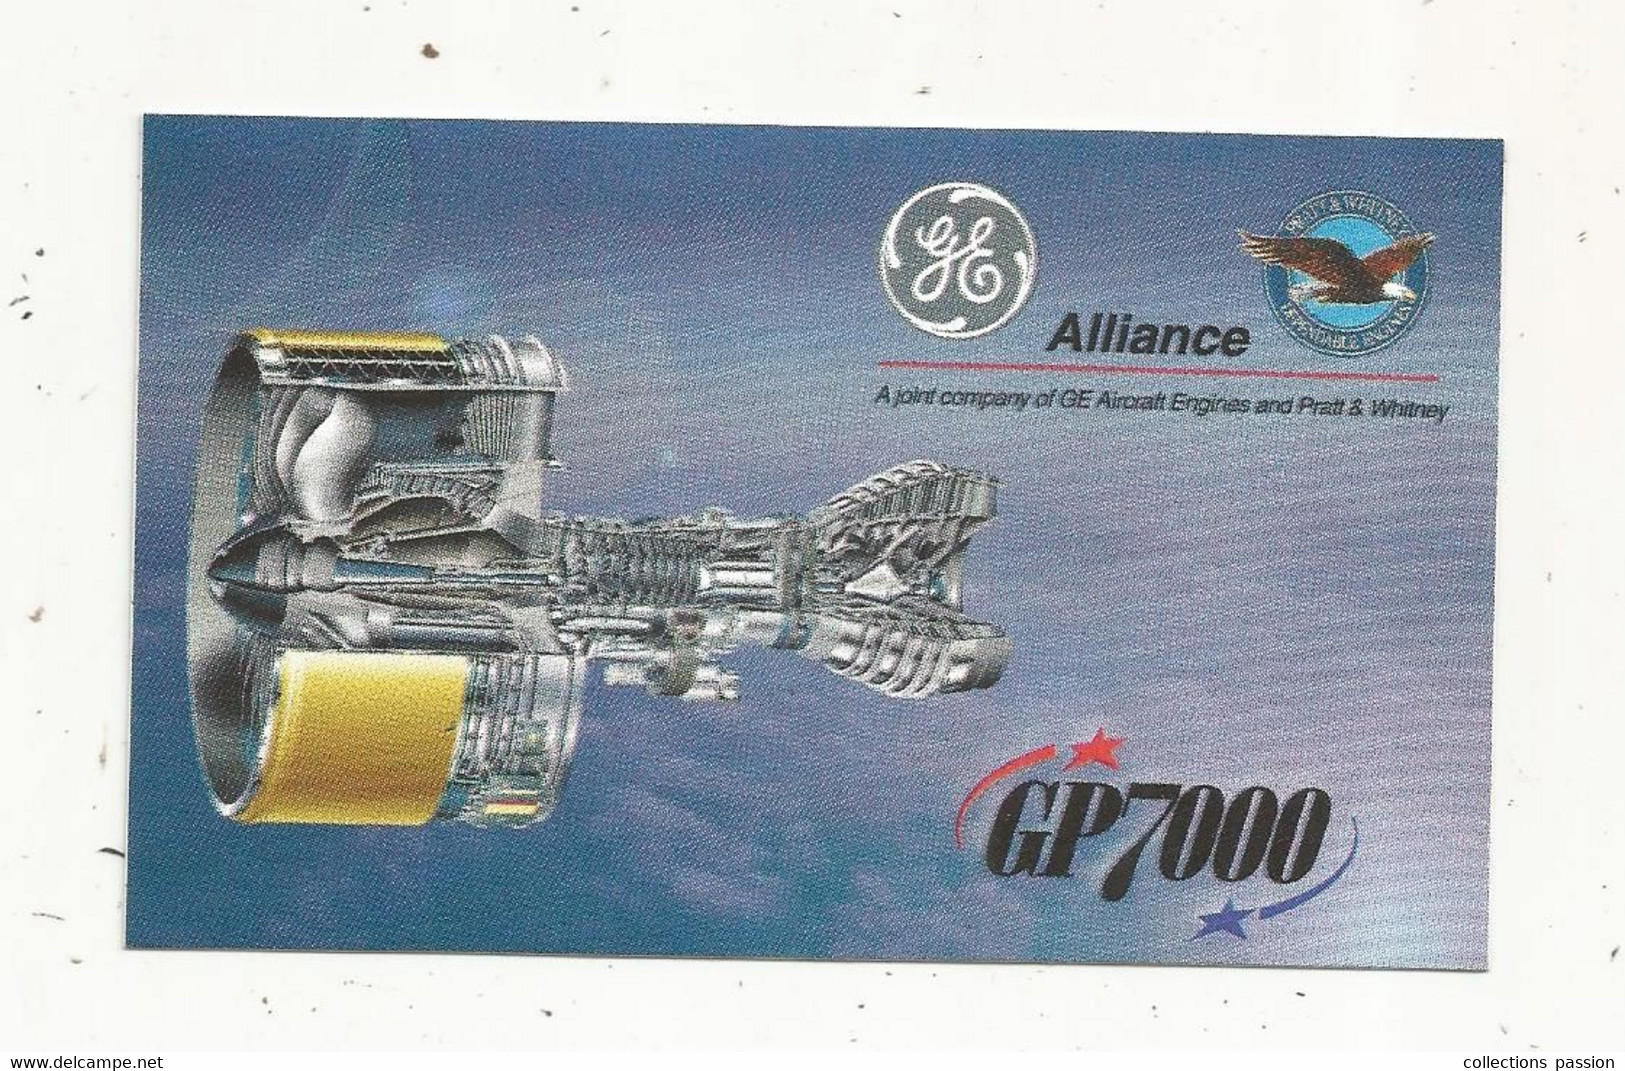 Autocollant, 120 X 75 Mm, AVIATION , Moteur GP7000 ,ALLIANCE : Joint Company Of GE Aircraft Engines And Pratt & Whitney - Aufkleber